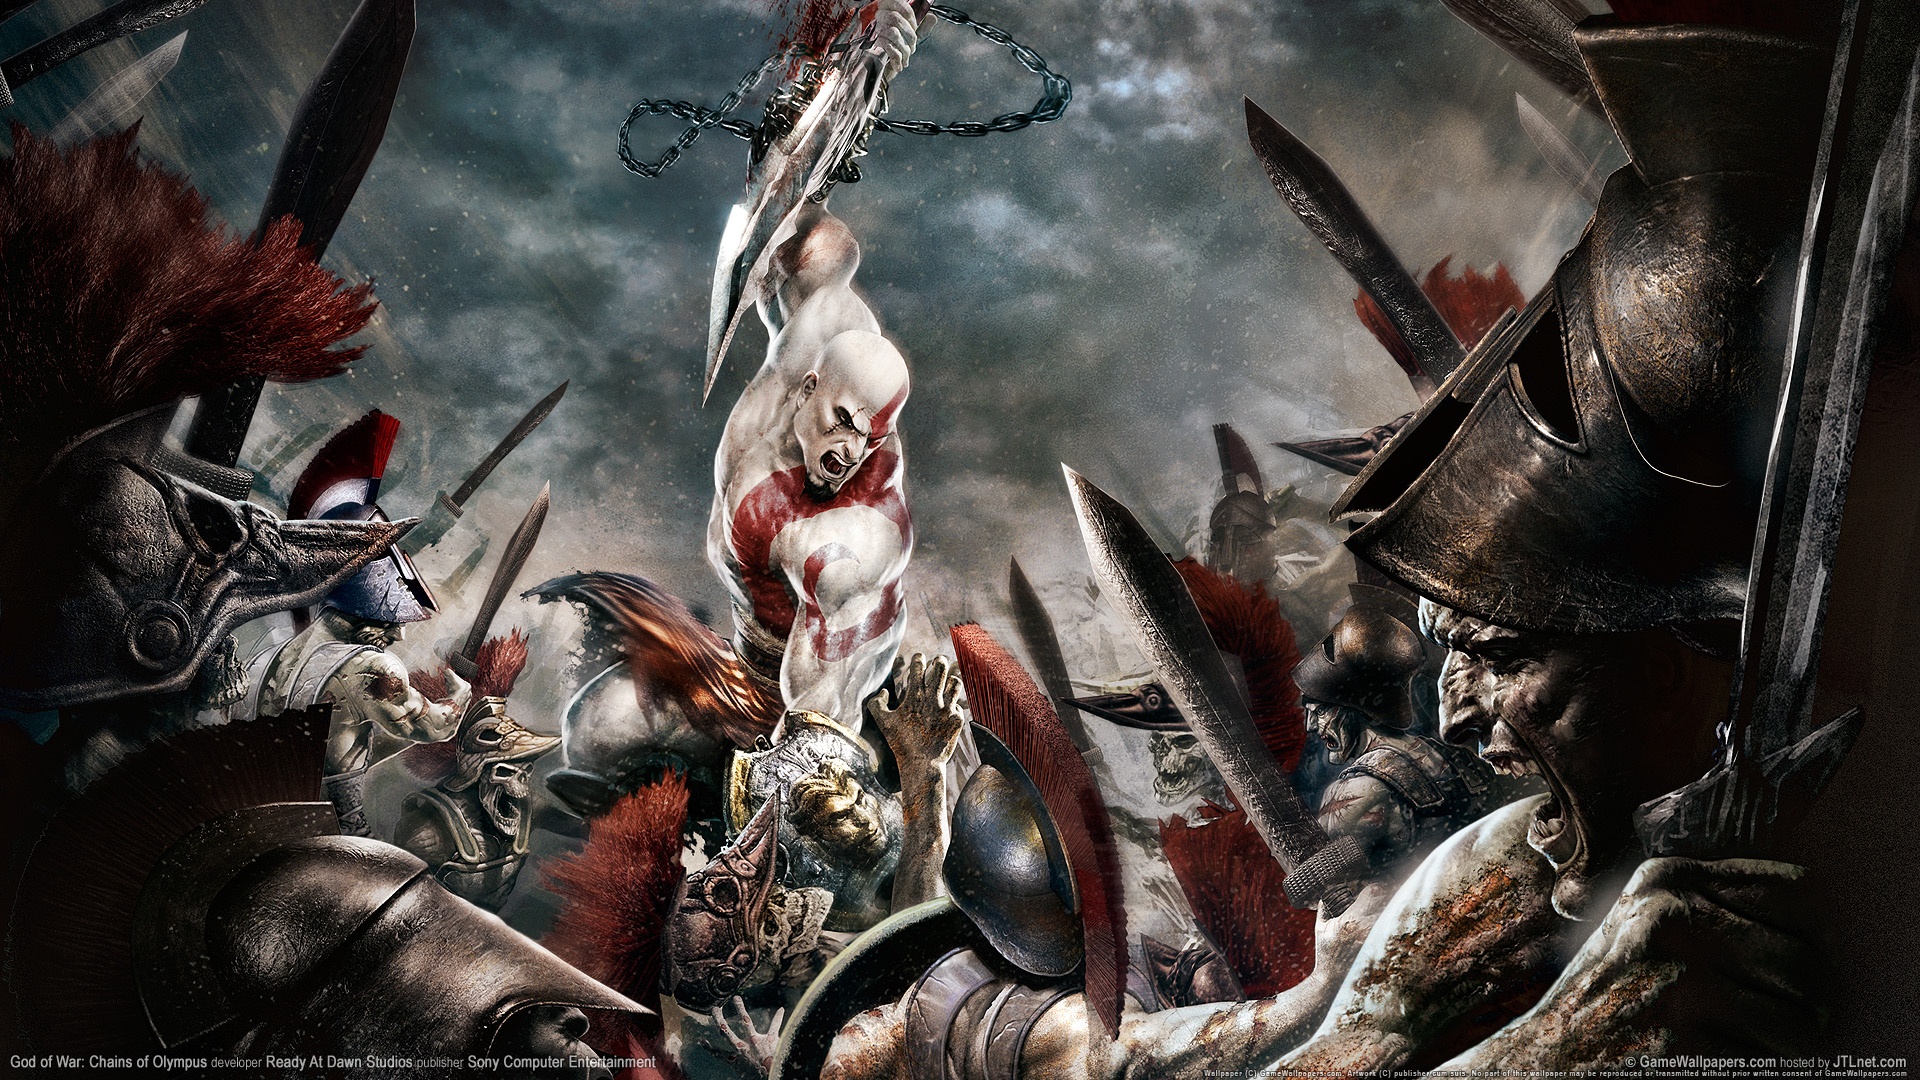 God of War 2 New Game Wallpaper in jpg format for free download